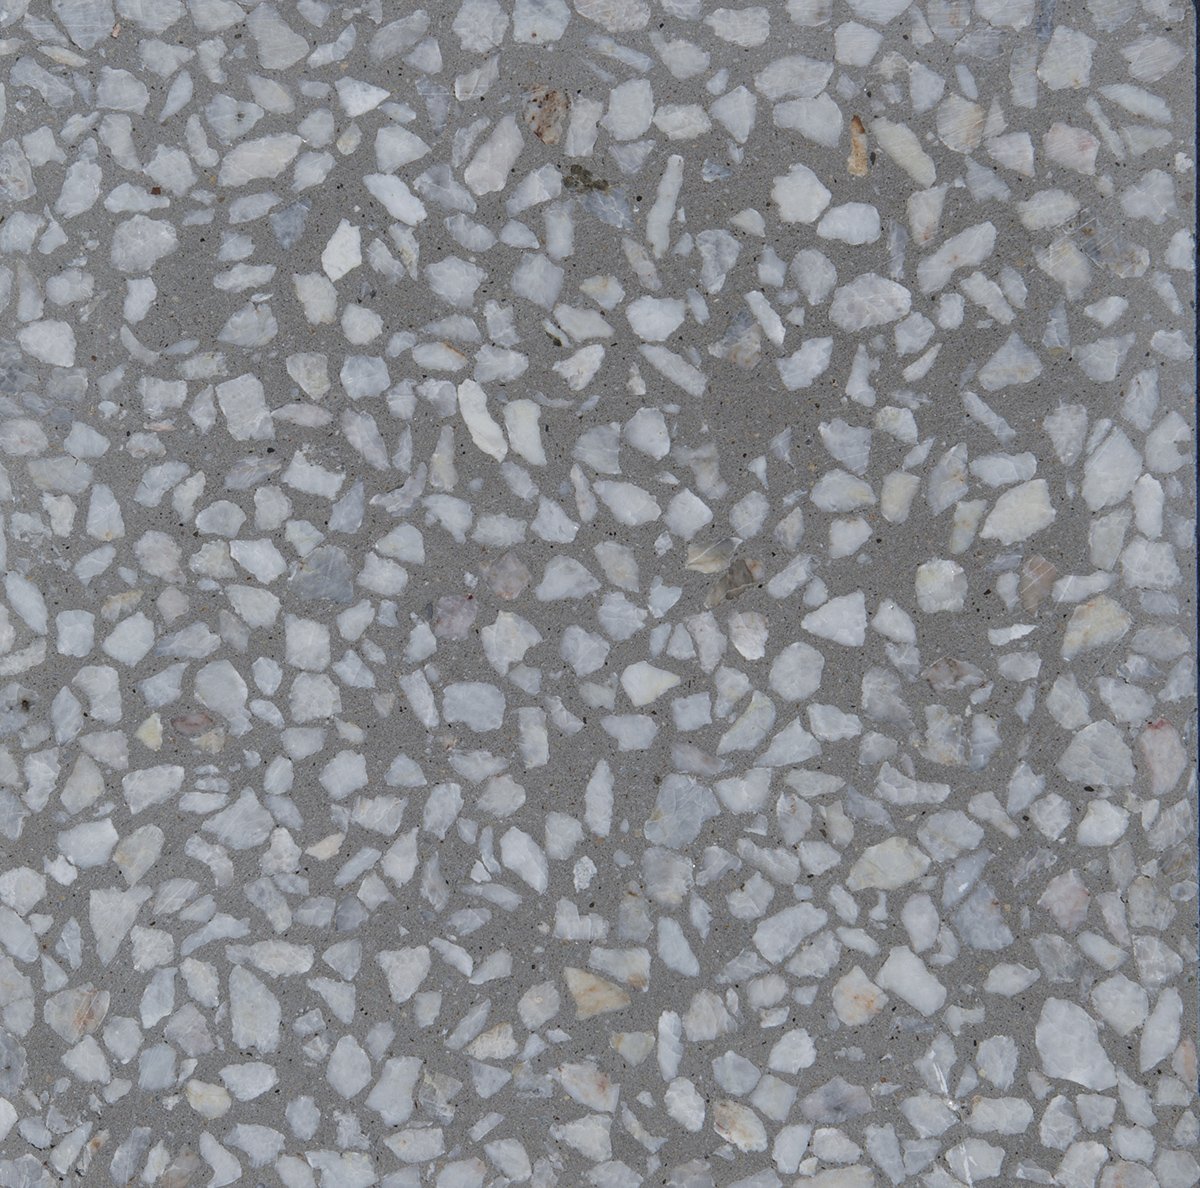 White coarse stone with gray background